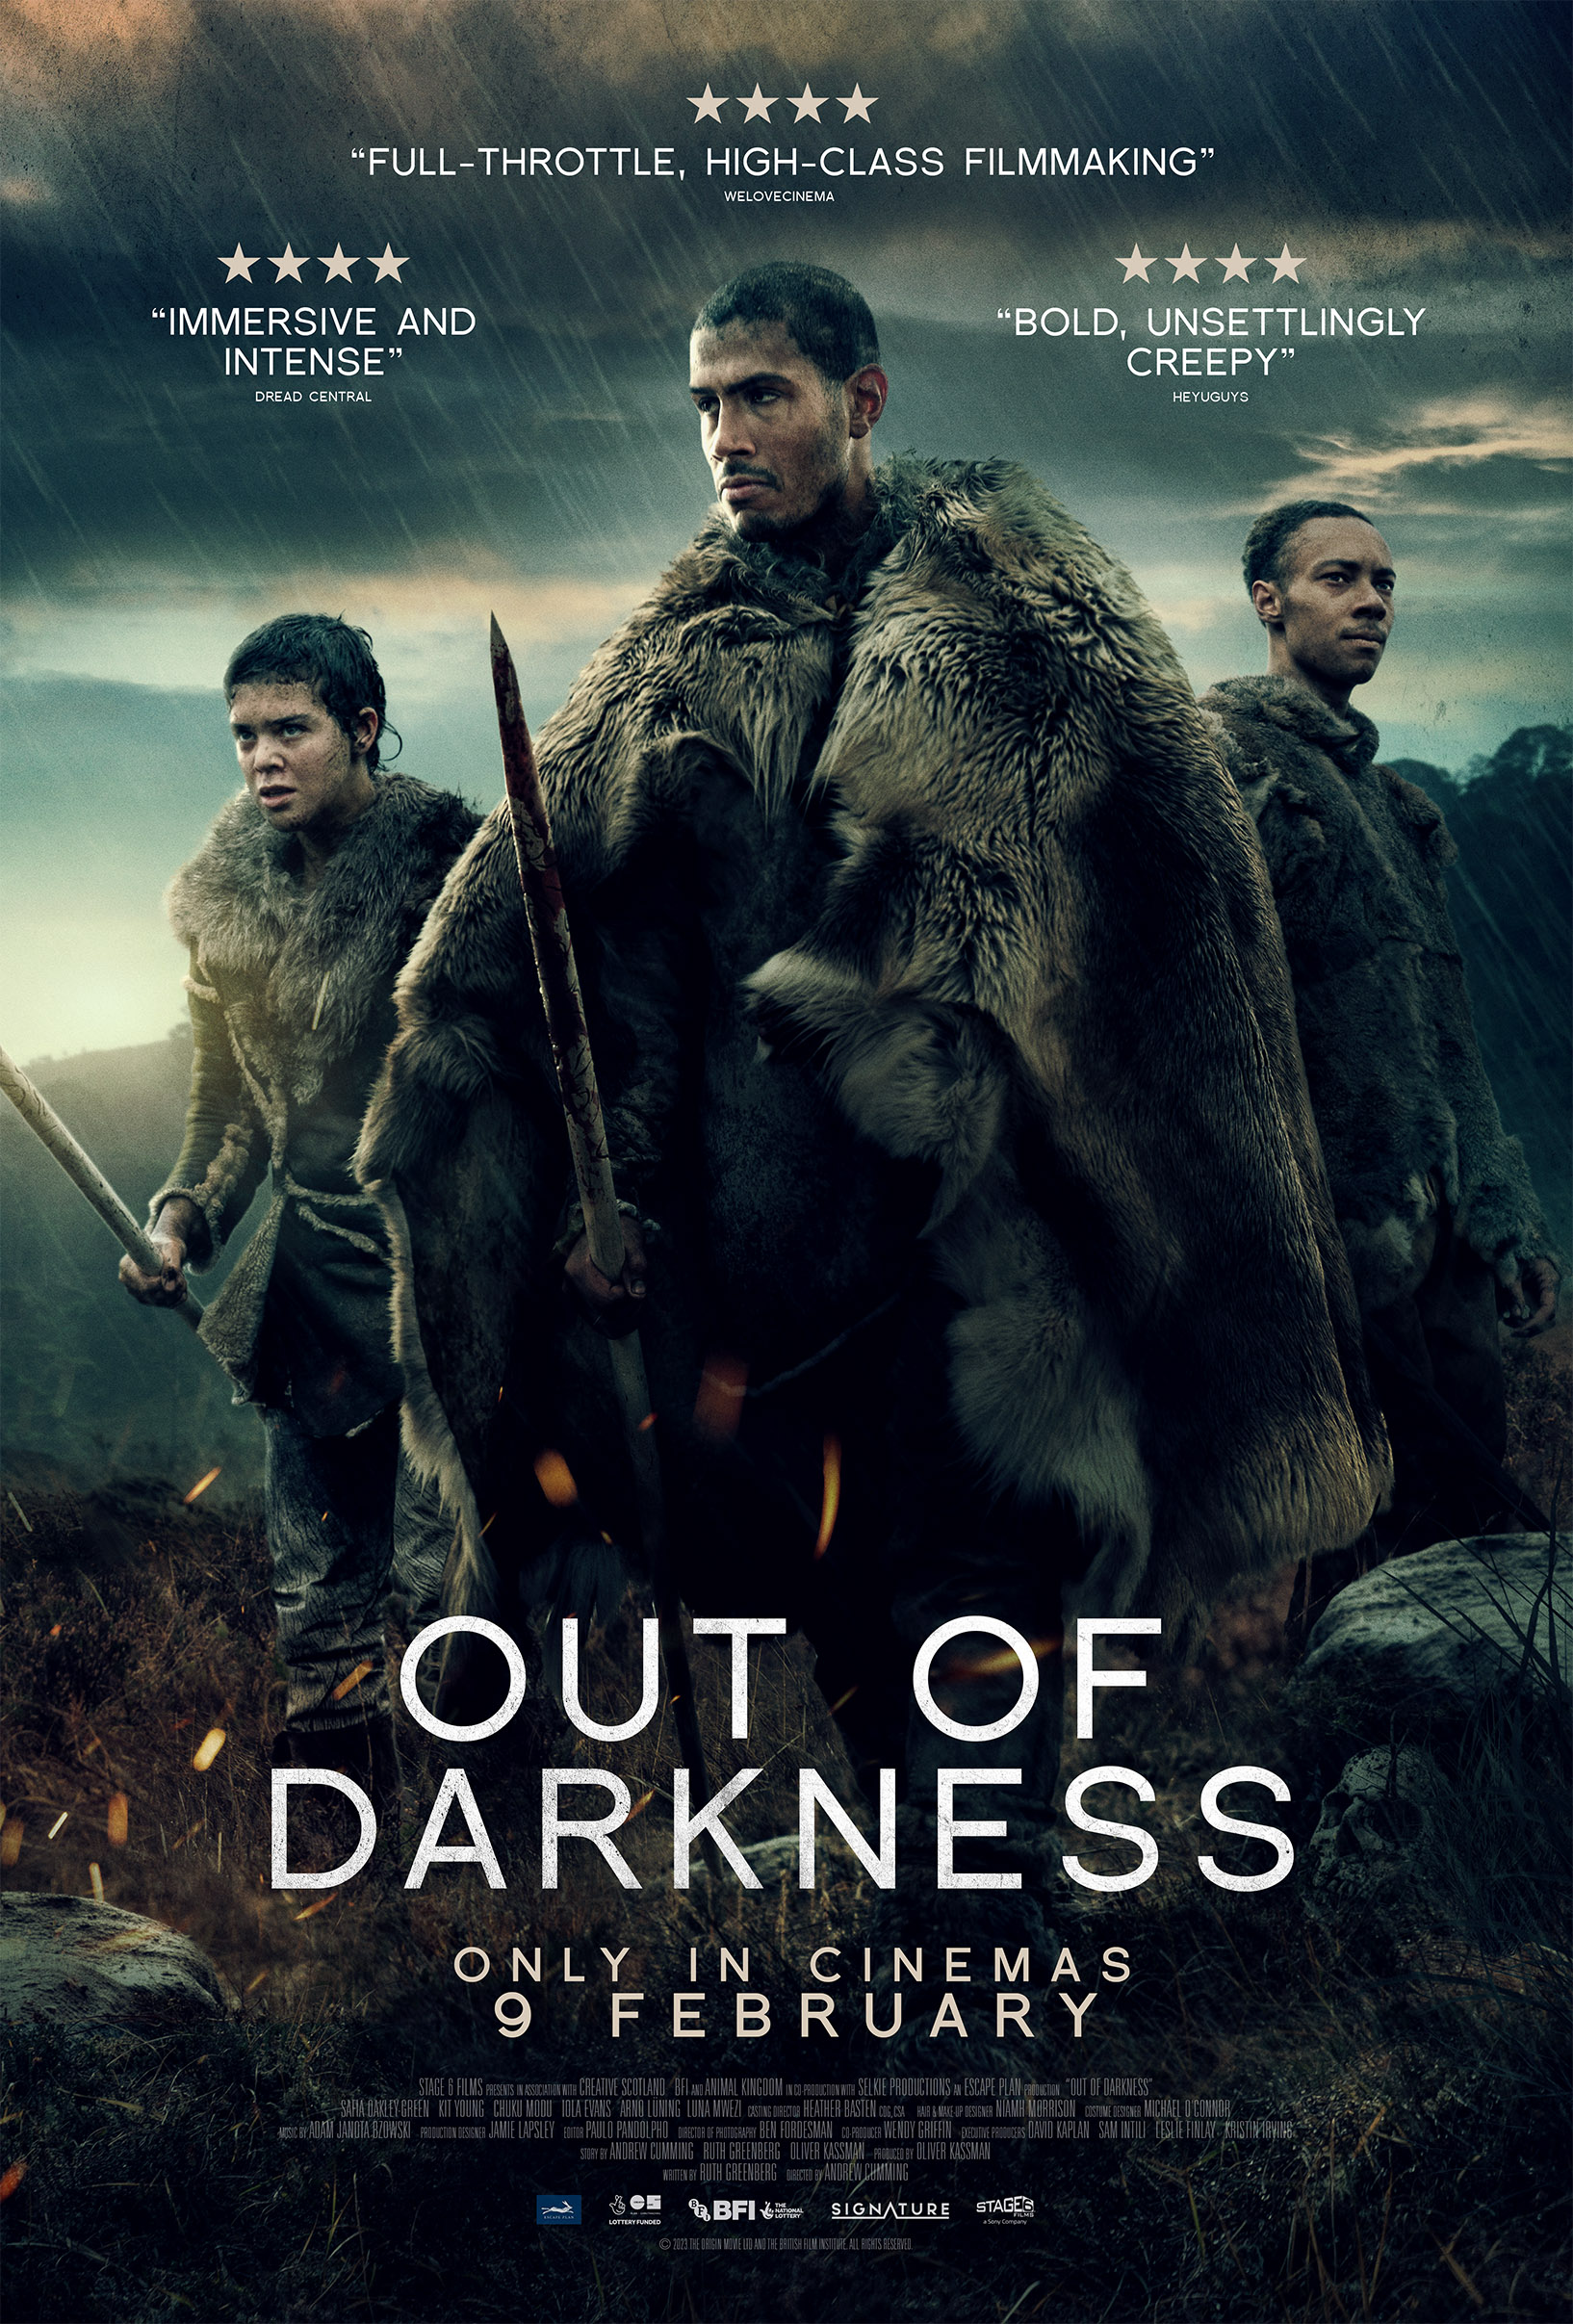 Out Of Darkness Trailer and artwork for Stone Age horror